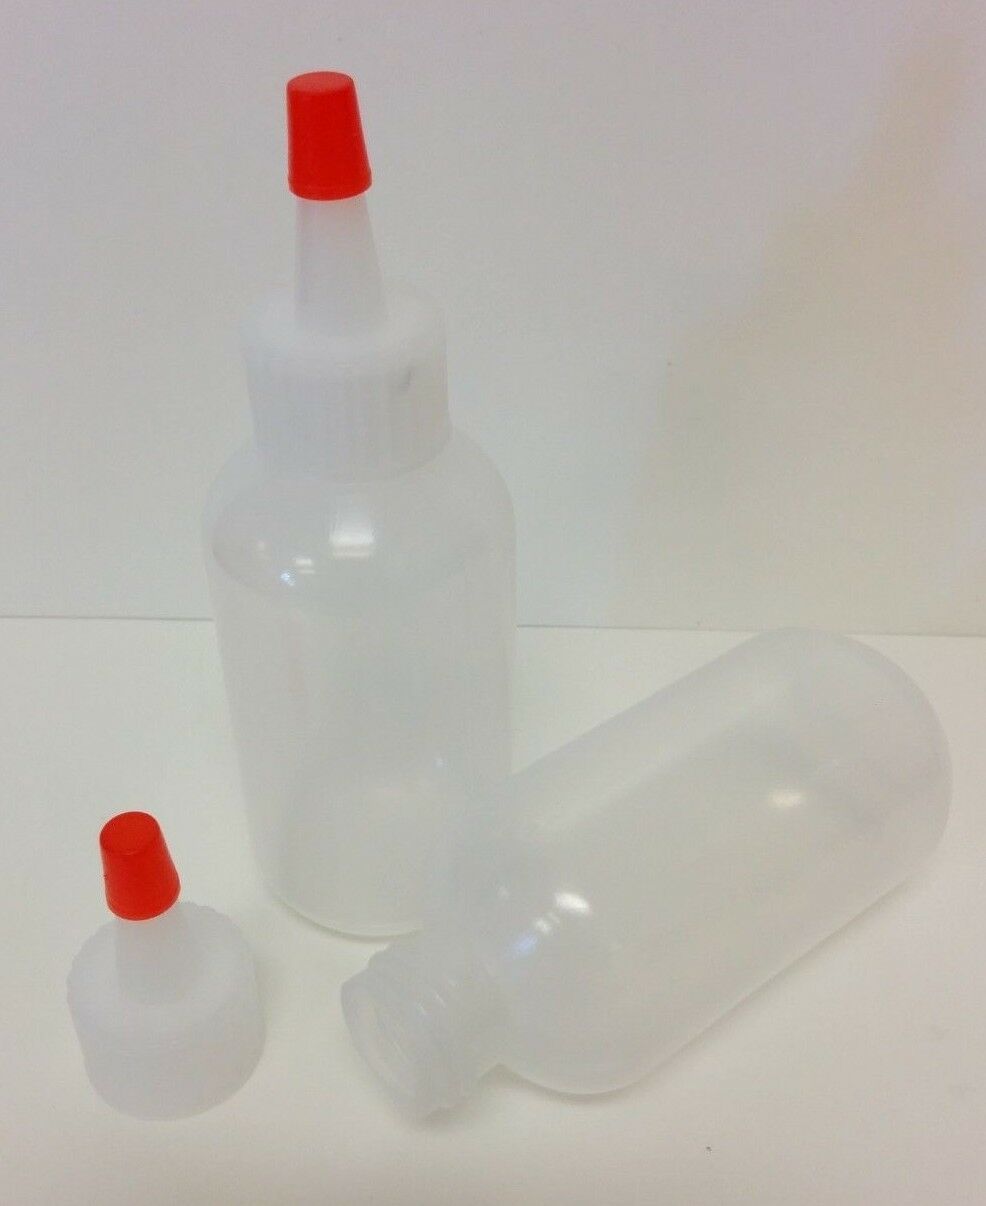 20 Pack Of 2oz (60ml) Plastic Boston Round Squeeze Bottles With Yorker Caps